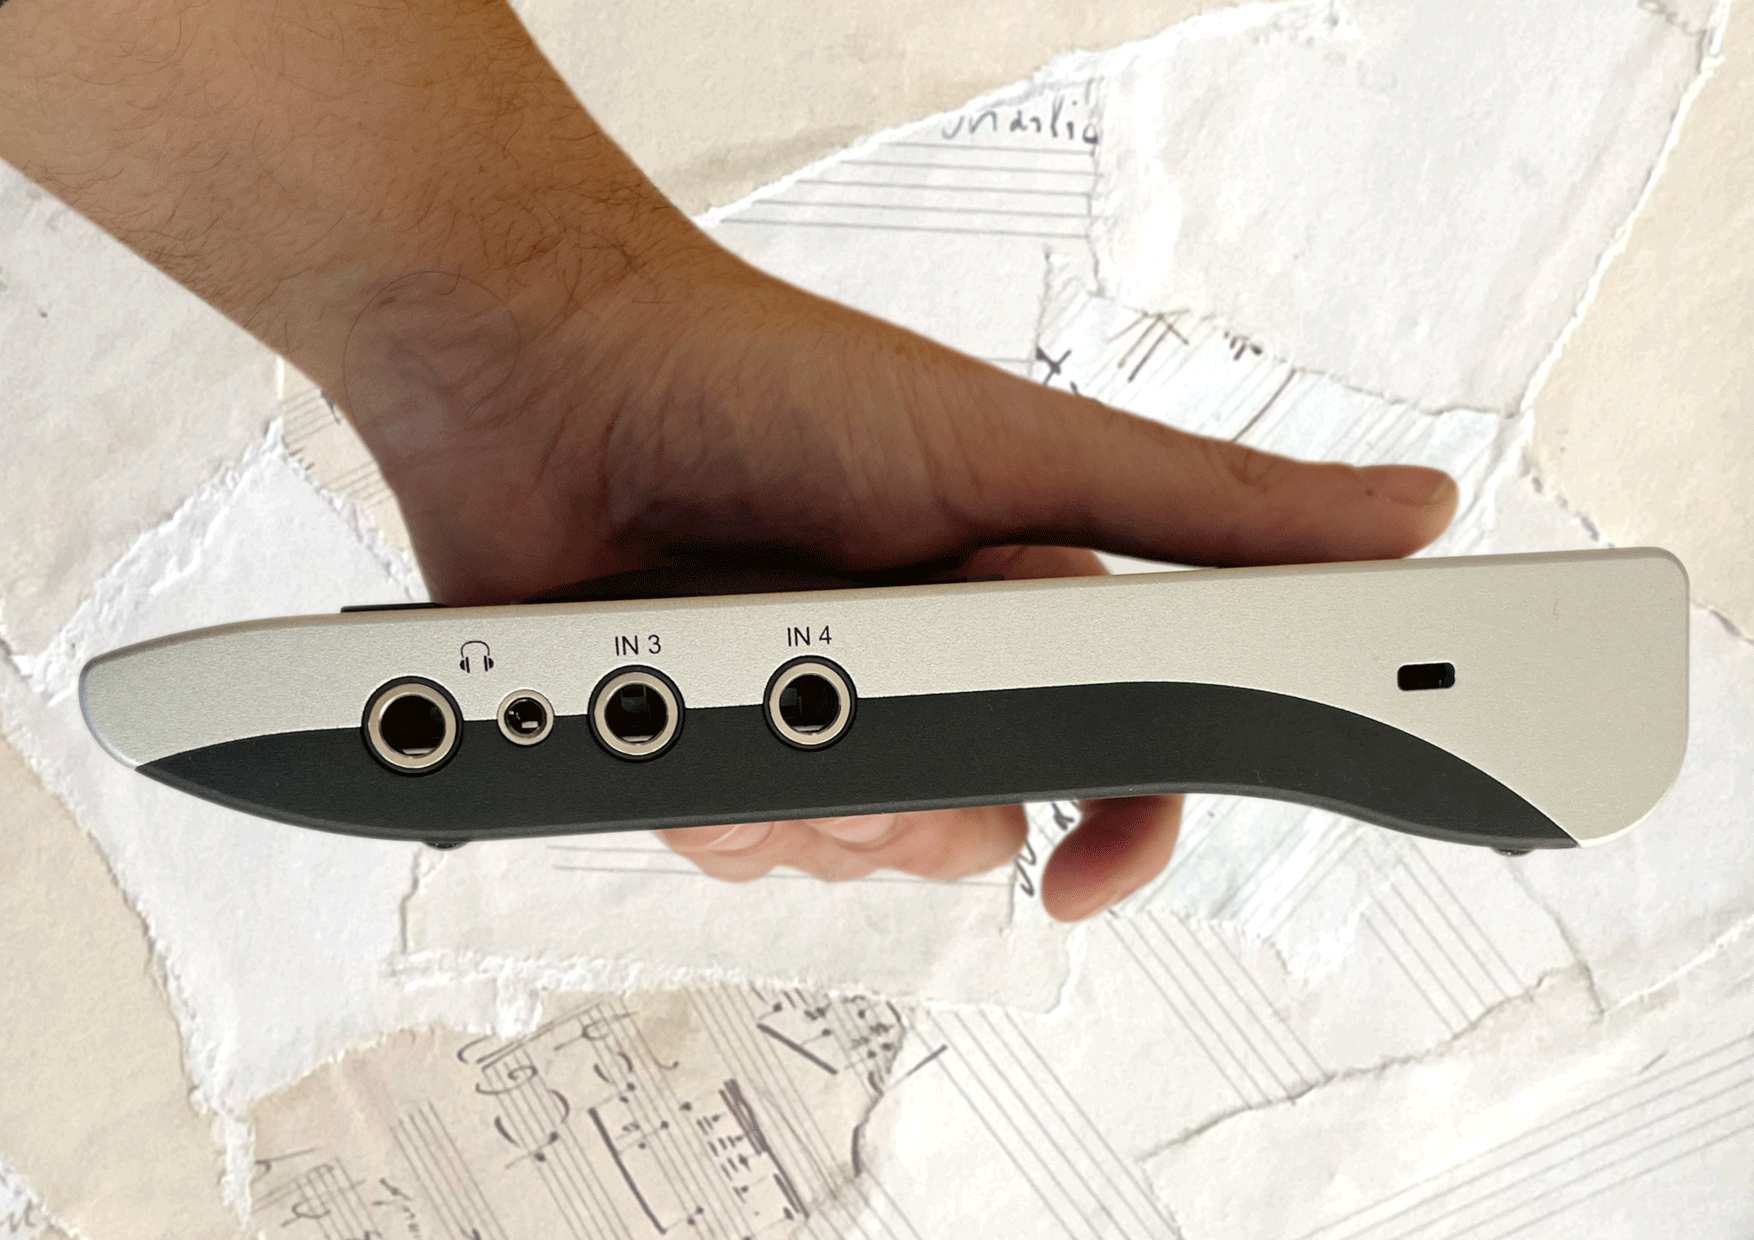 Right side panel of the RME Babyface Pro FS, with2 x headphone sockets and unbalanced line inputs